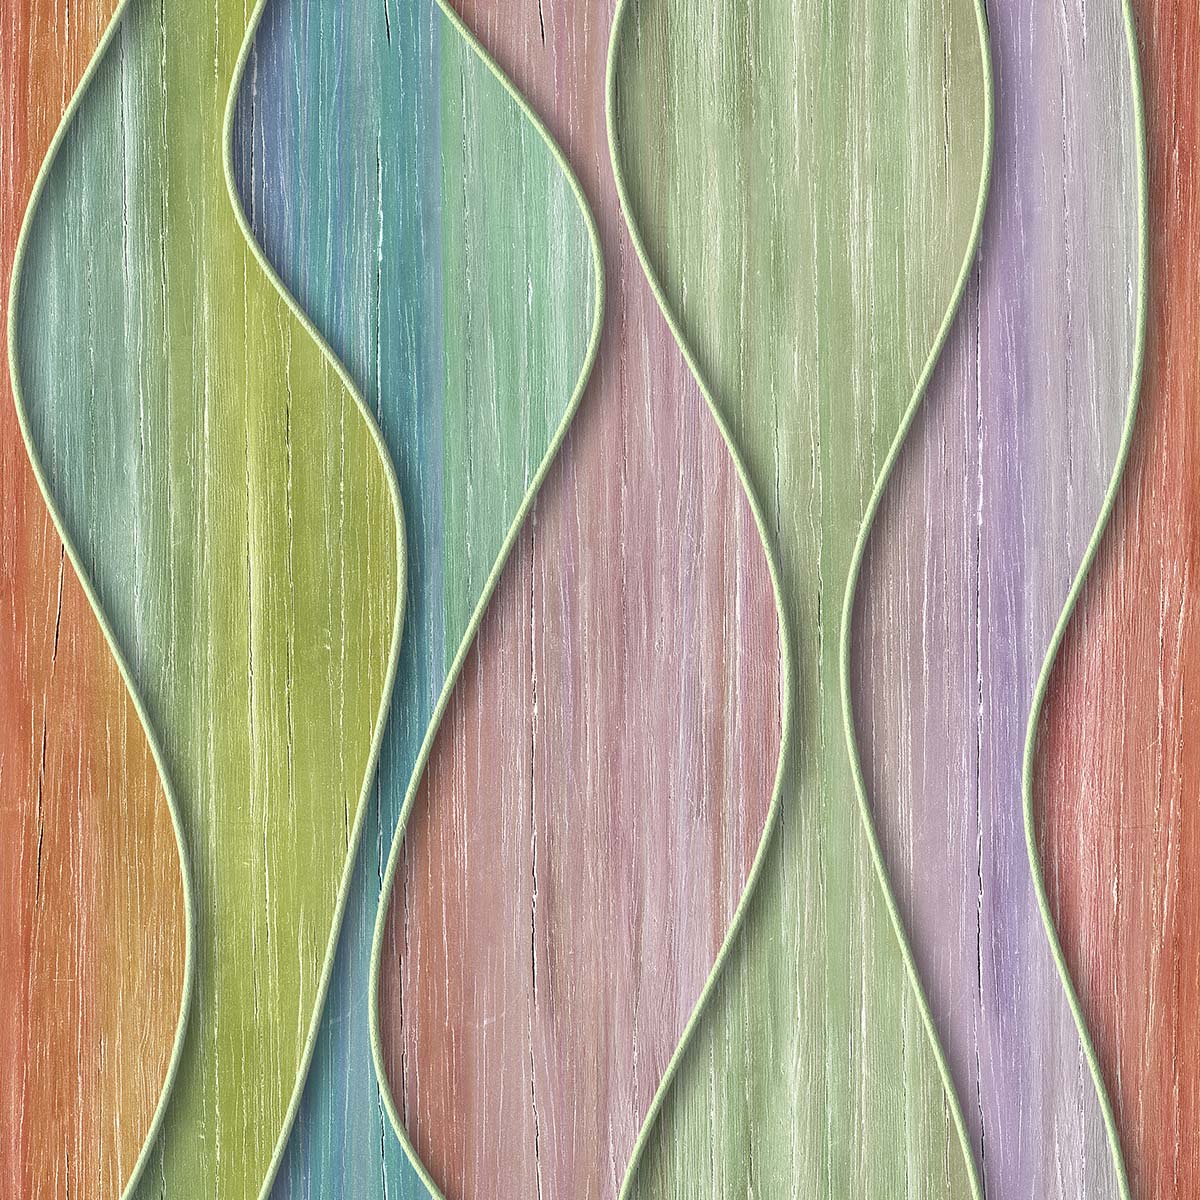 A colorful wavy pattern on a surface